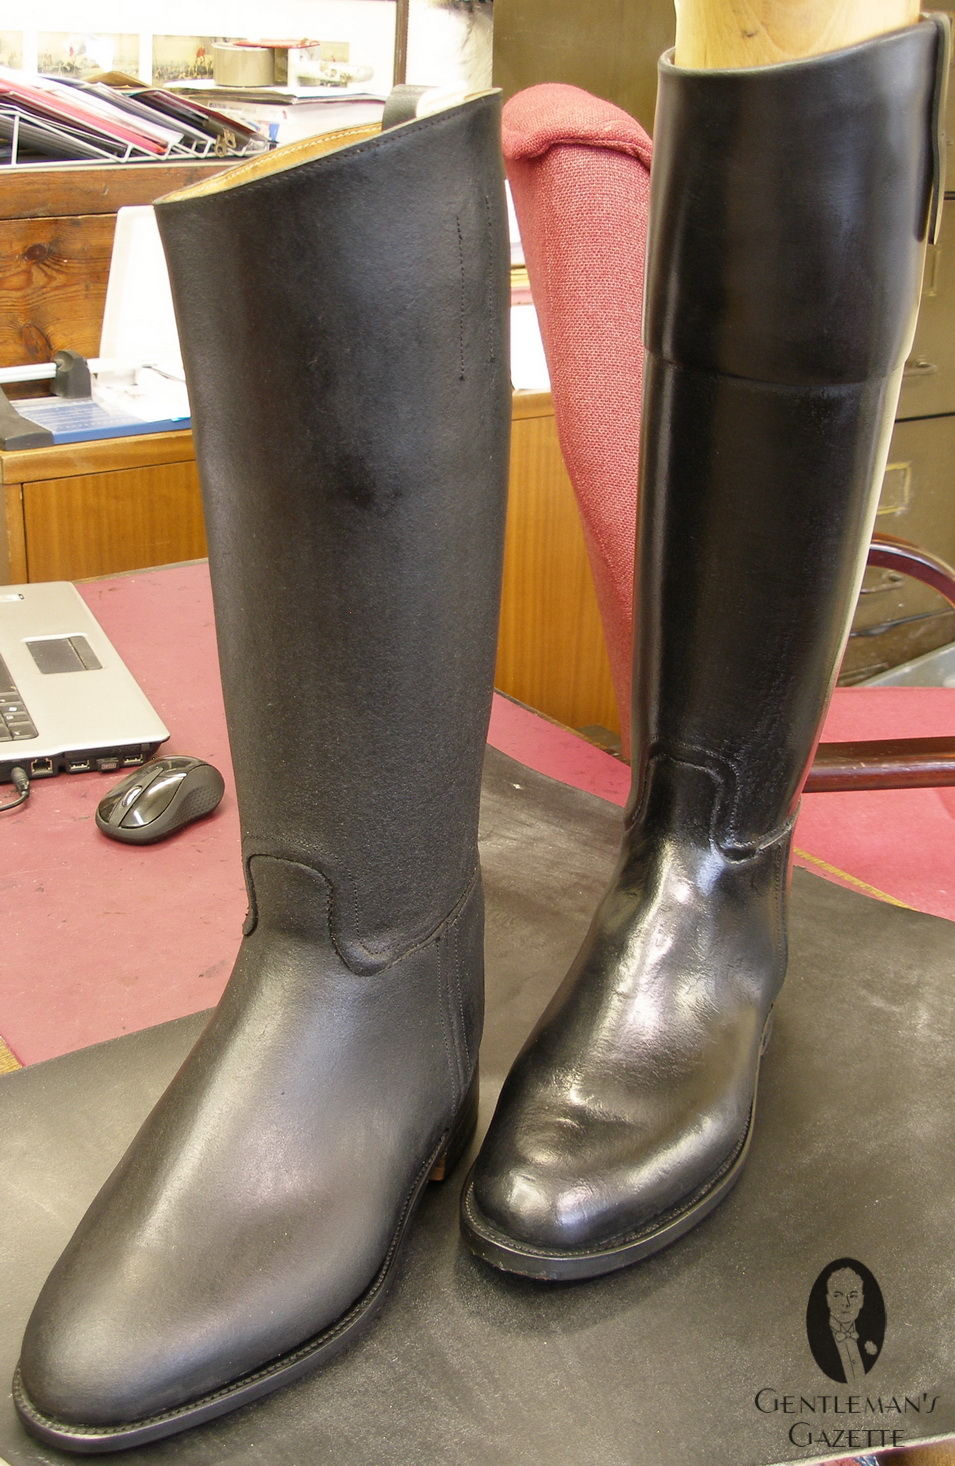 Wax-calf-boots-before-and-after-boning